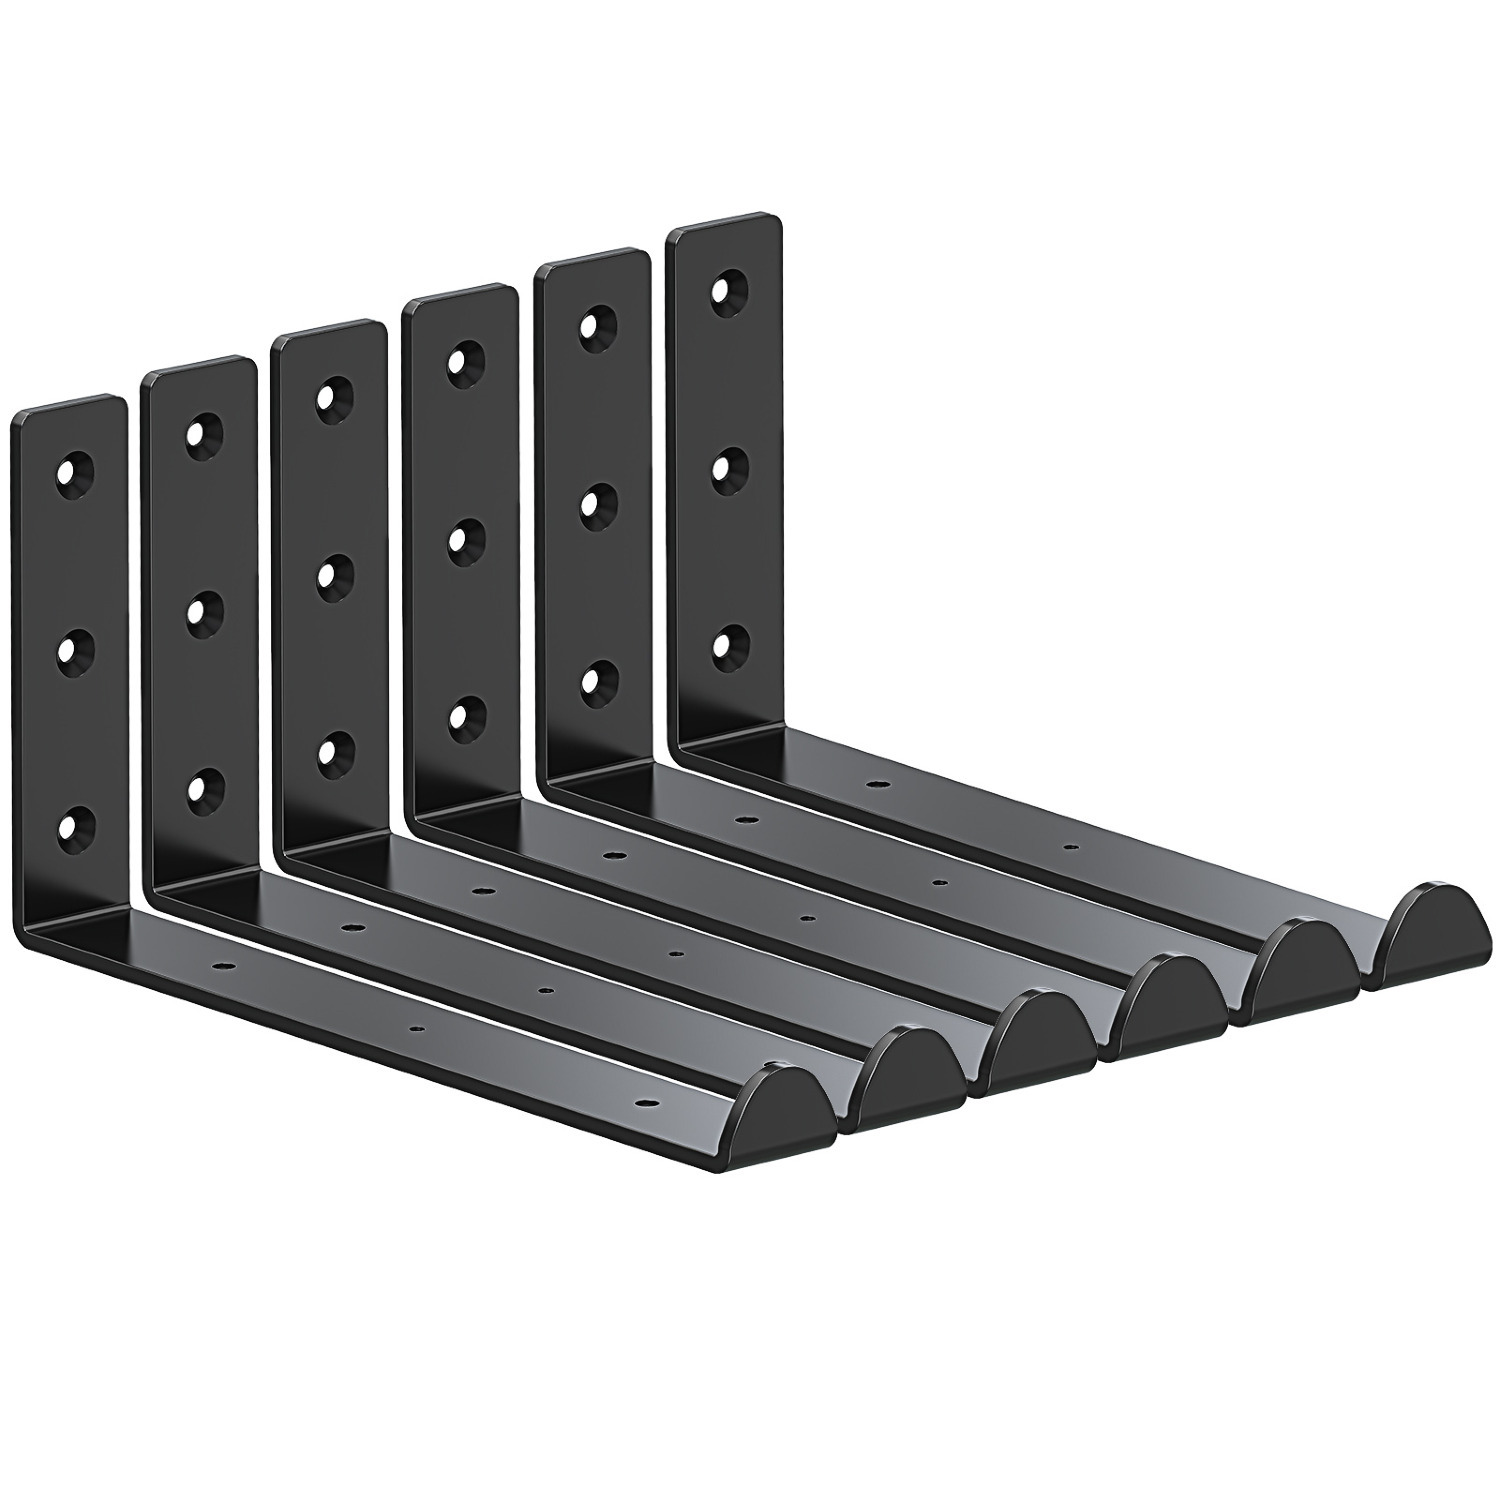 SMATTO 6-Pack 12" Heavy Duty Shelf Brackets (Up to 110lbs, Black) $10 + Free Shipping w/ Prime or $35+ orders